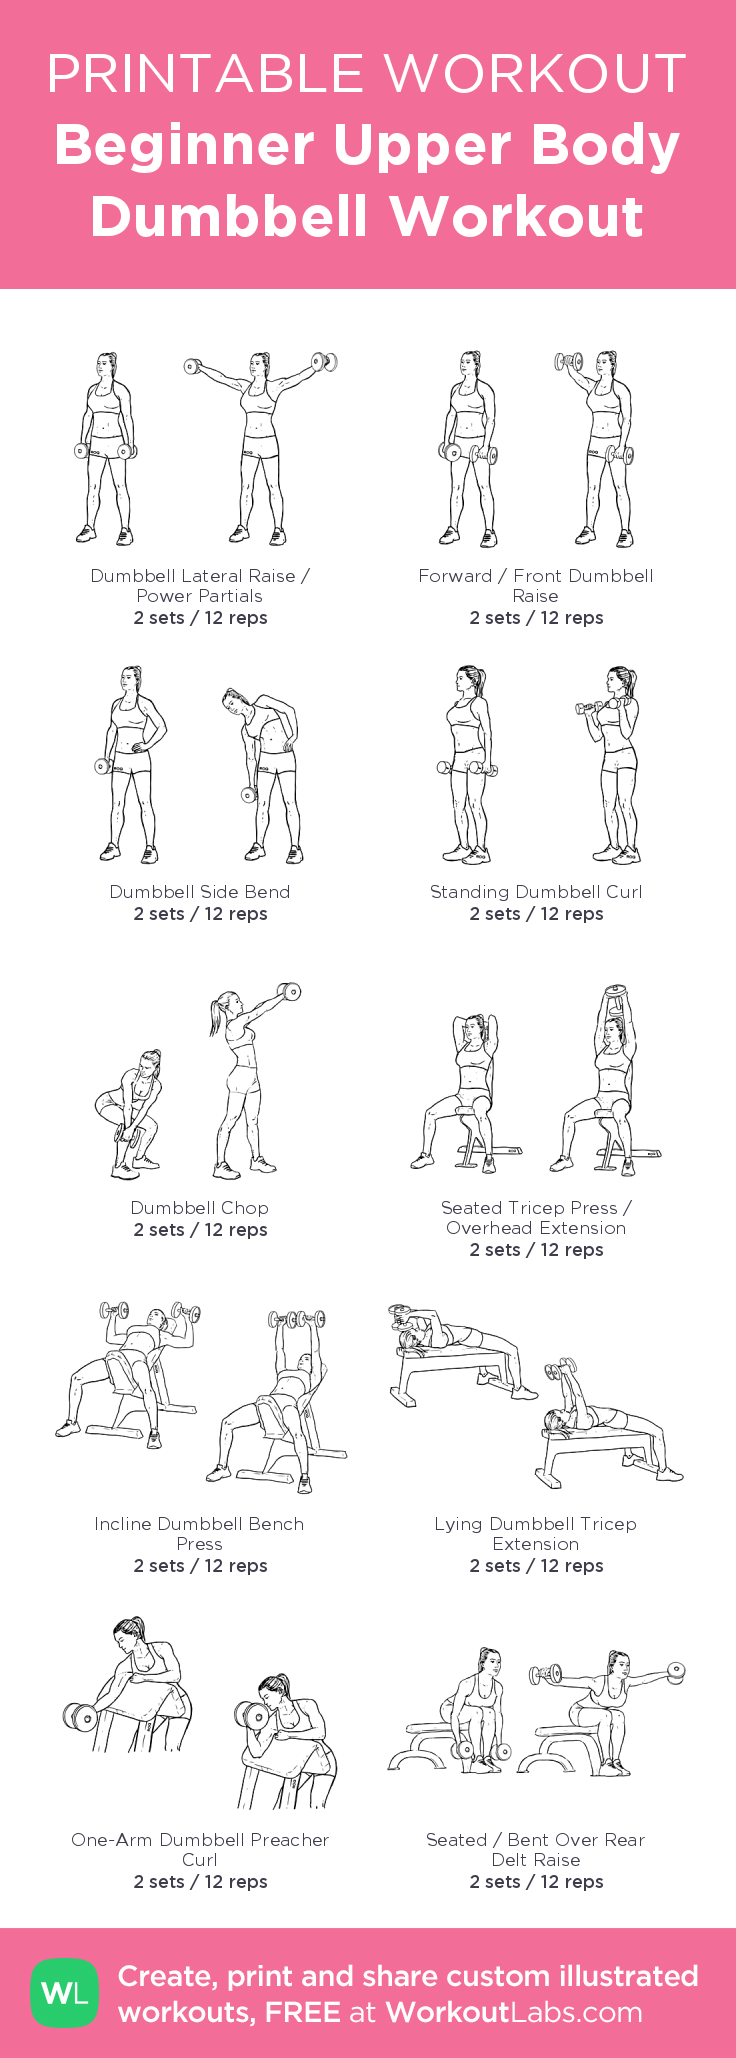 dumbbell workouts for beginners pdf